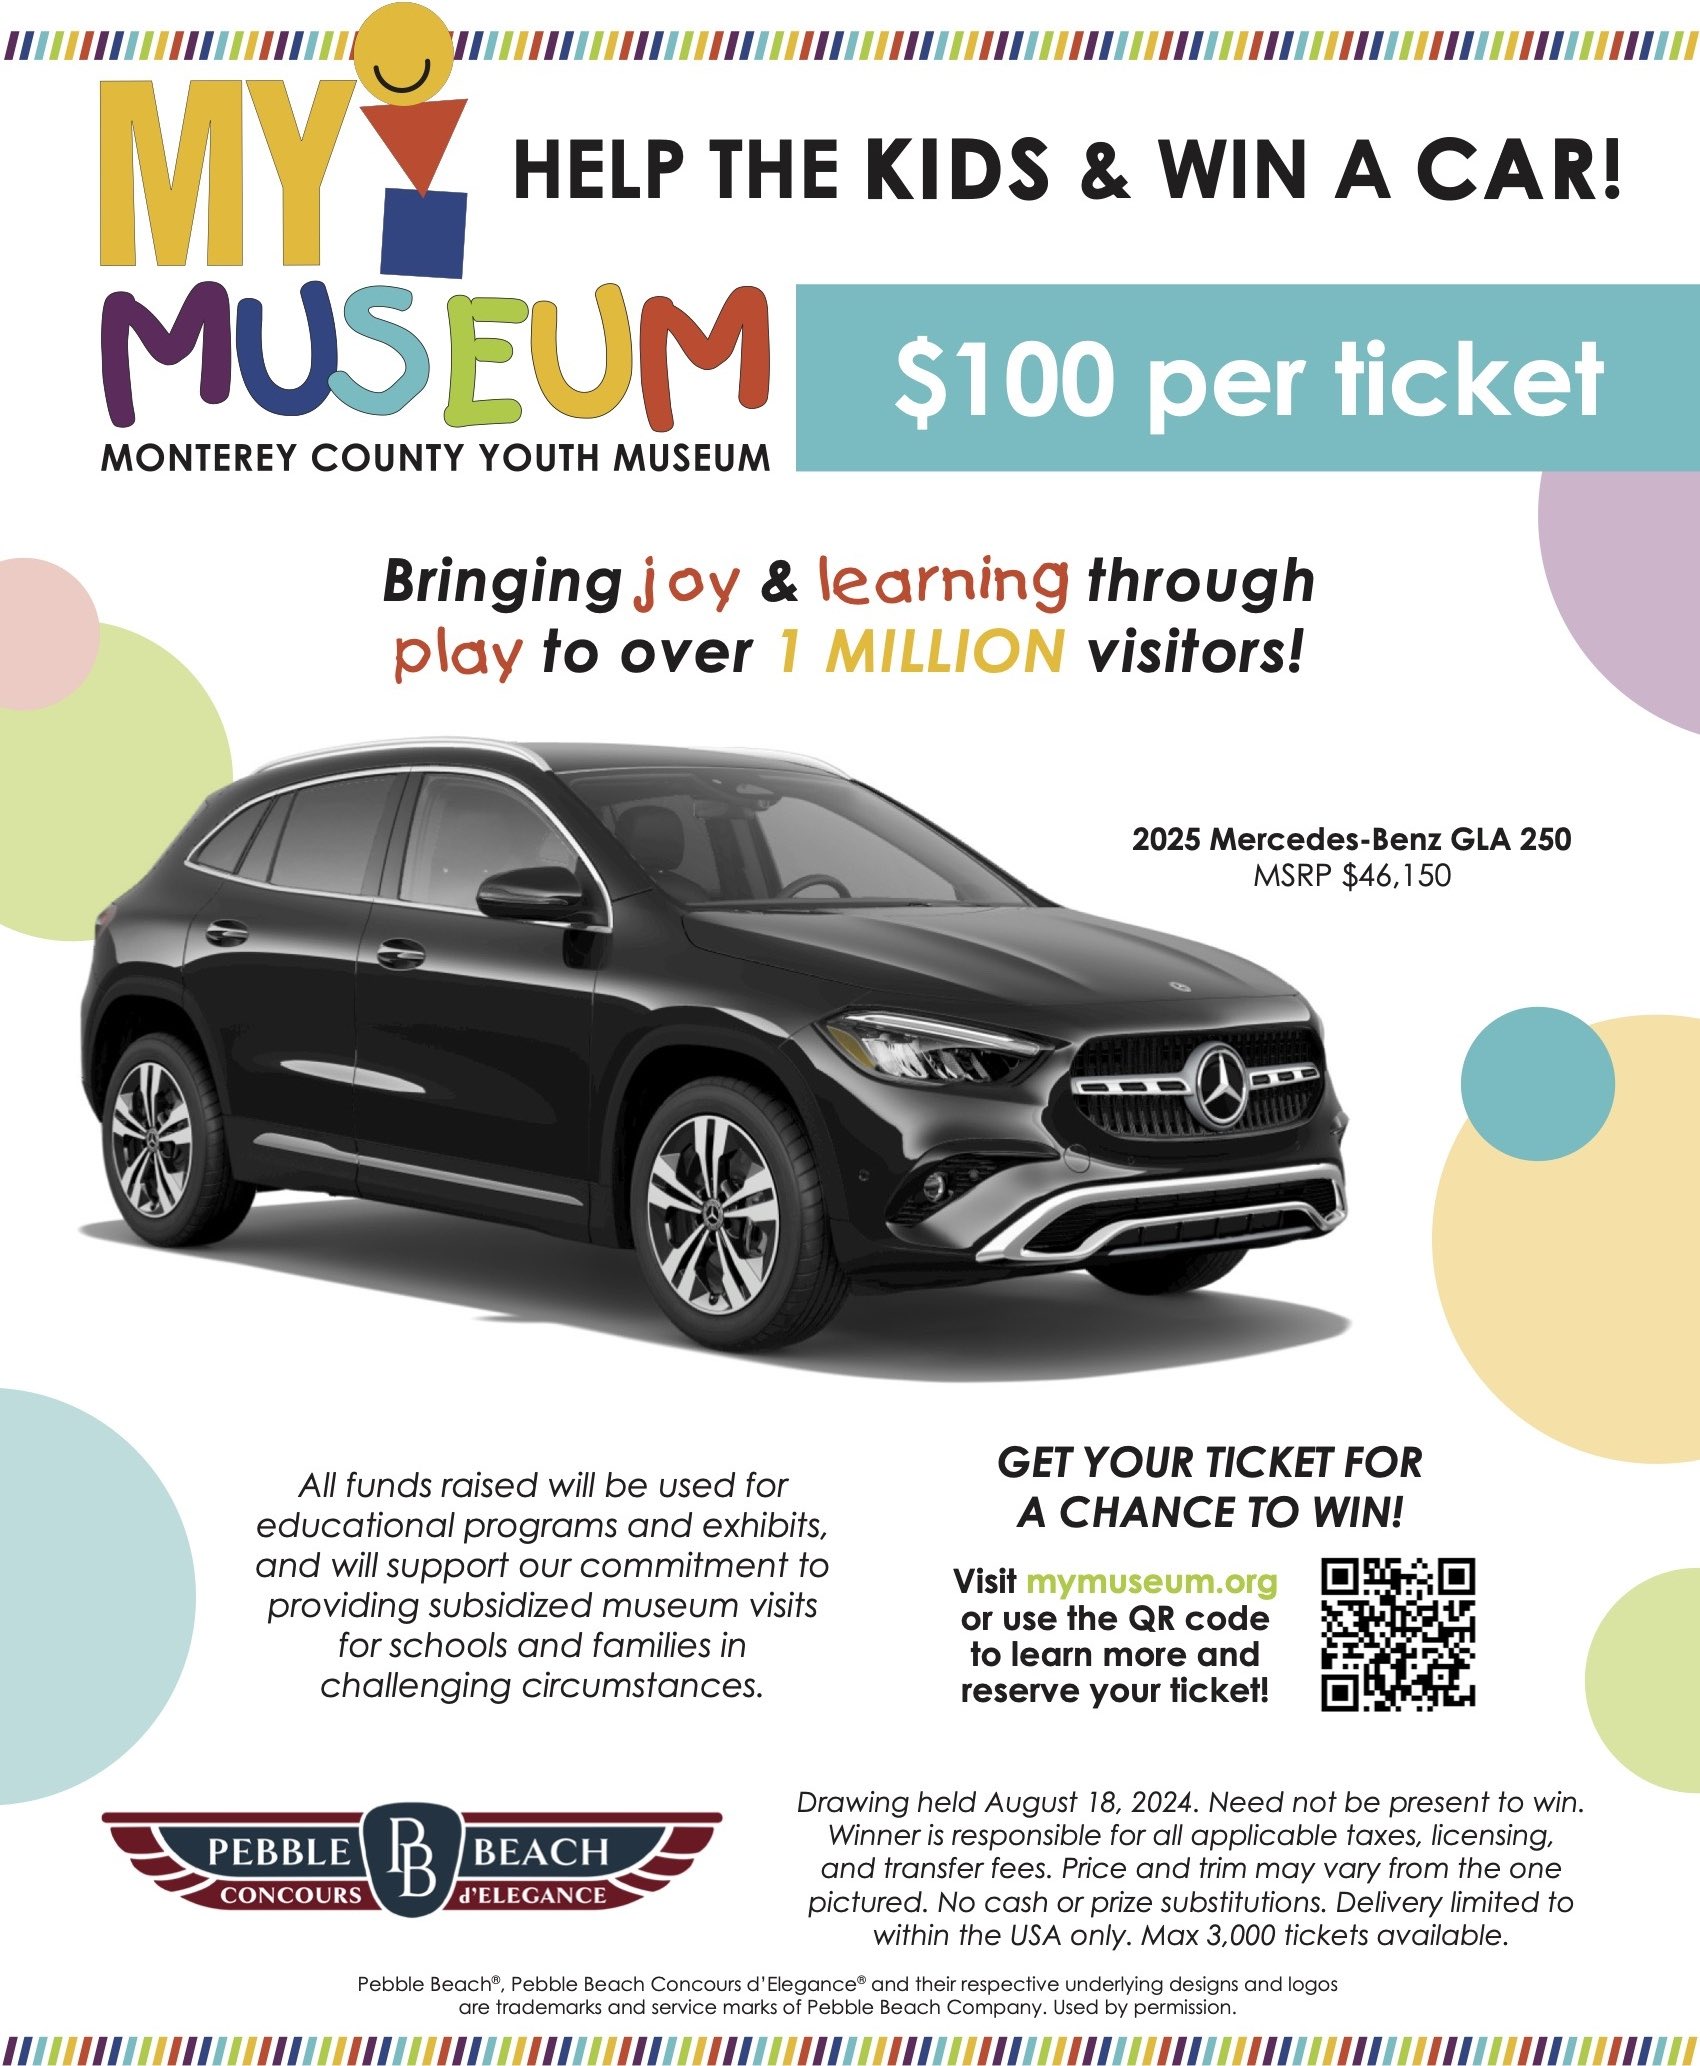 Help the Kids and win a Car! $100 per ticket. Bringing joy & learning through play to over 1 MILLION visitors! 2025 Mercedes-Benz GLA 250 MSRP $46,150